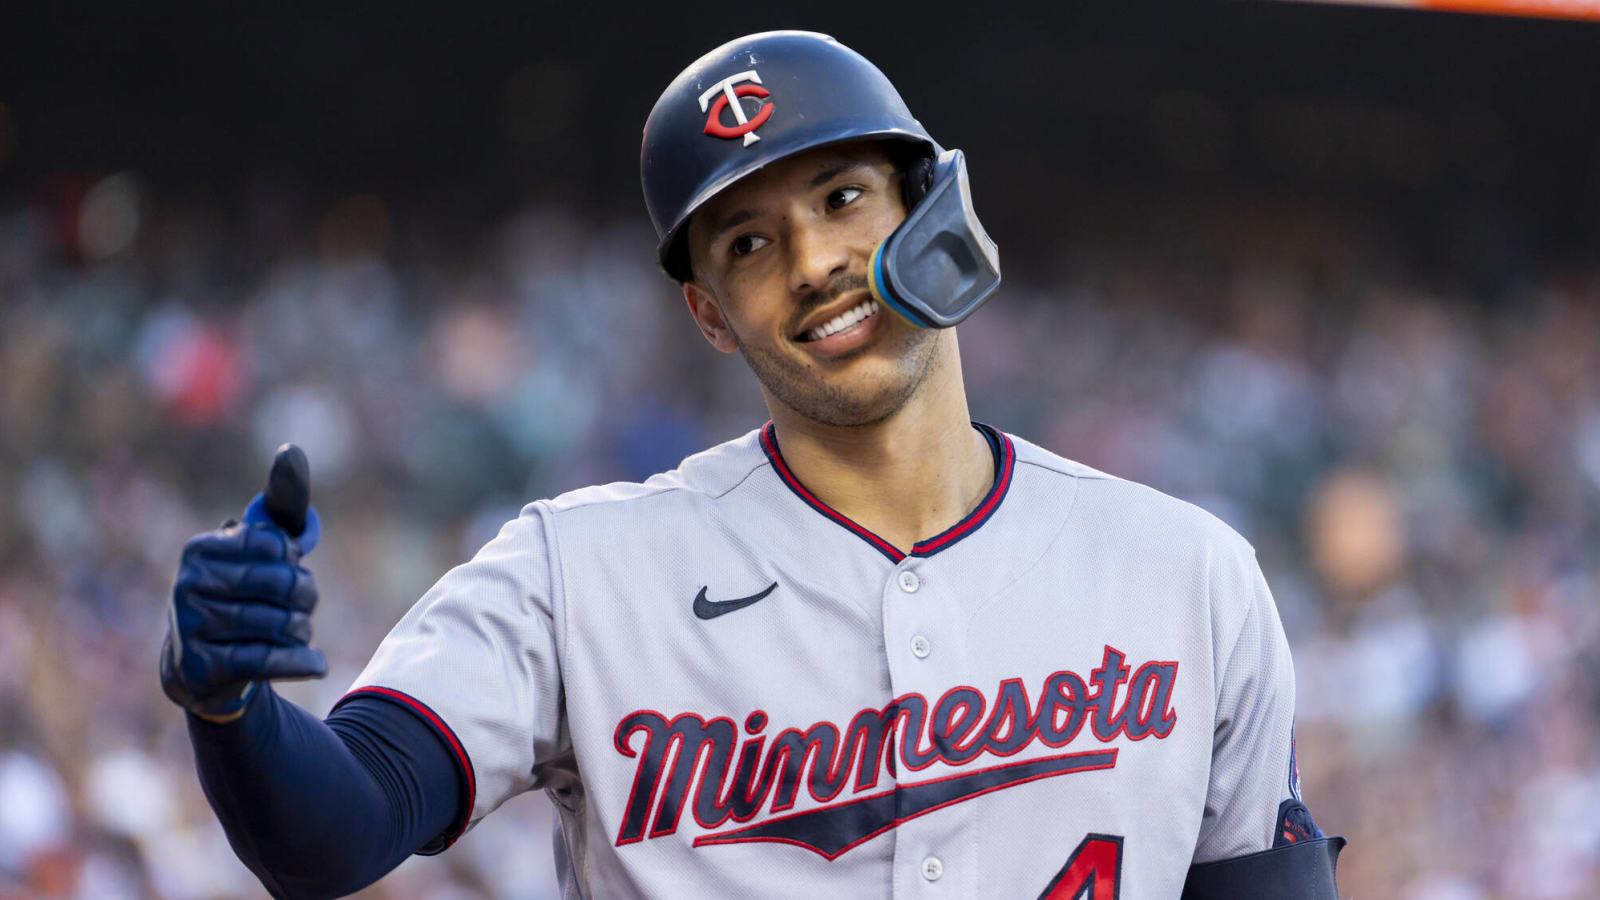 Cubs expected to pursue top shortstops in free agency